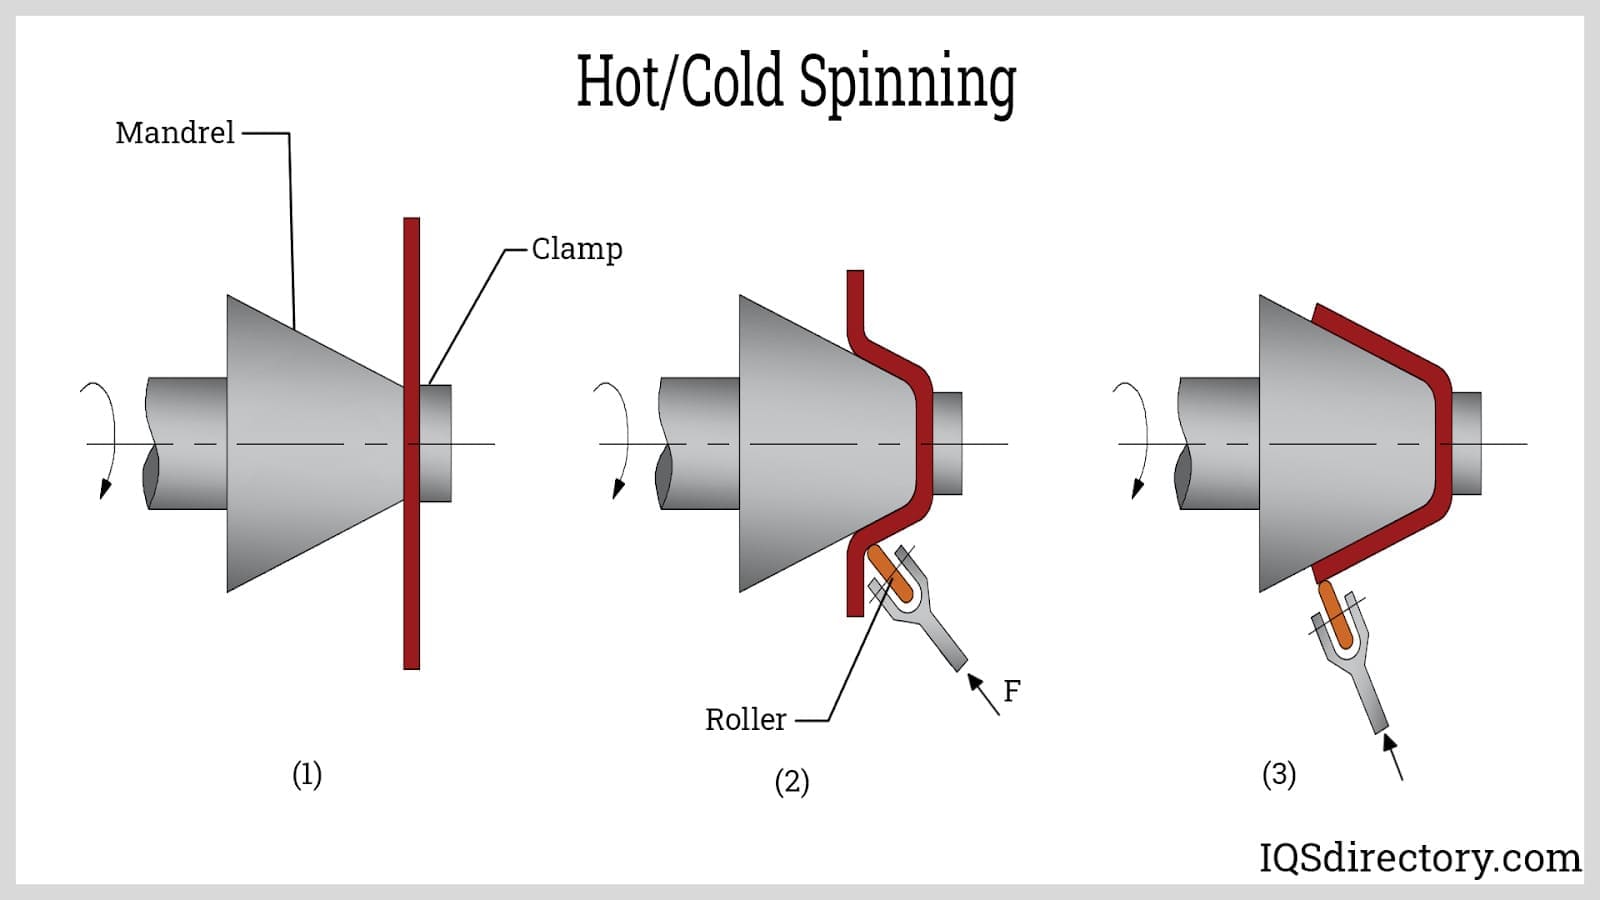 Hot and Cold Spinning